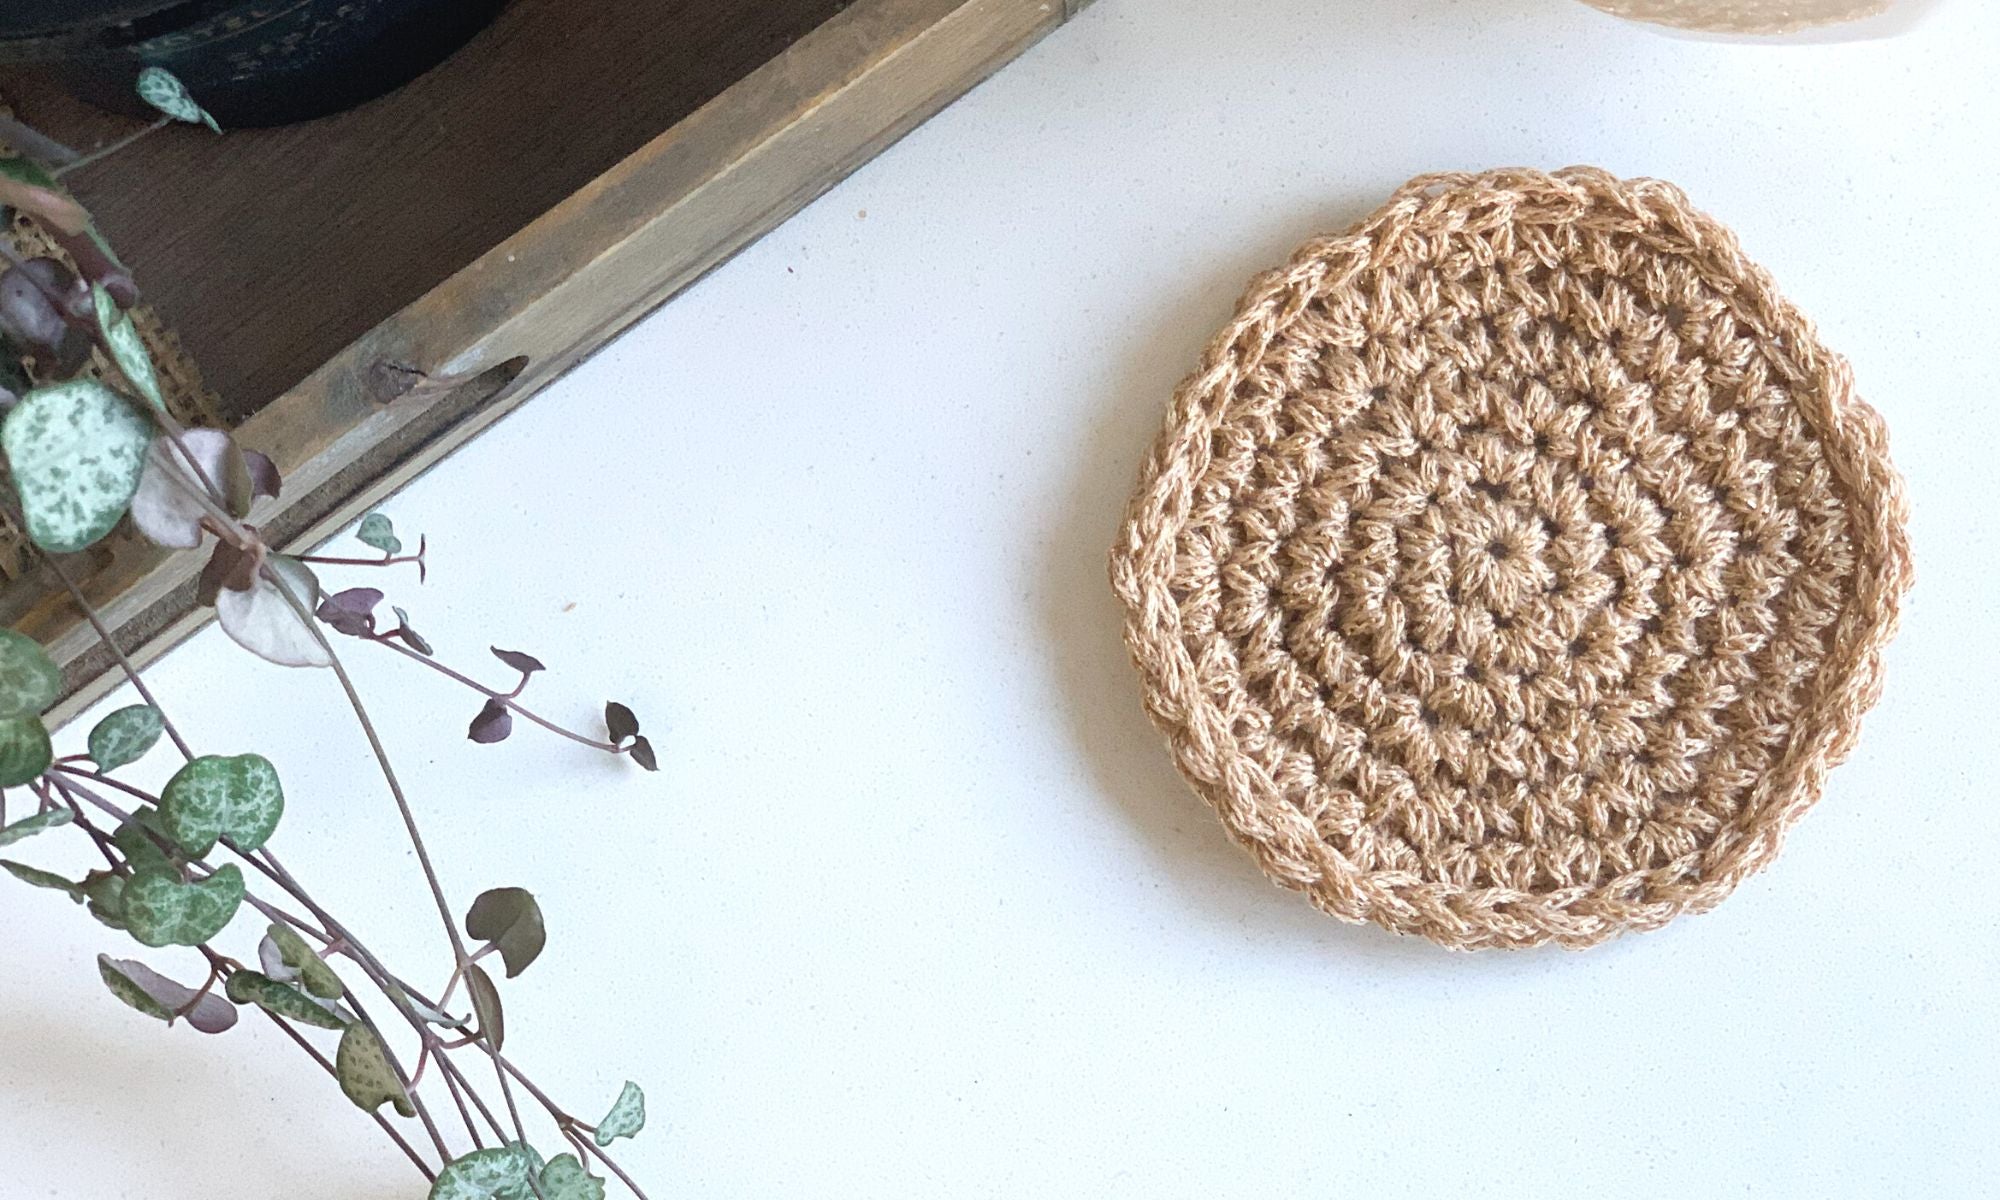 A sparkly golden coloured crochet coaster made using the magic circle spiral technique laying flat on a desktop with a trailing plant nearby and wooden tray.